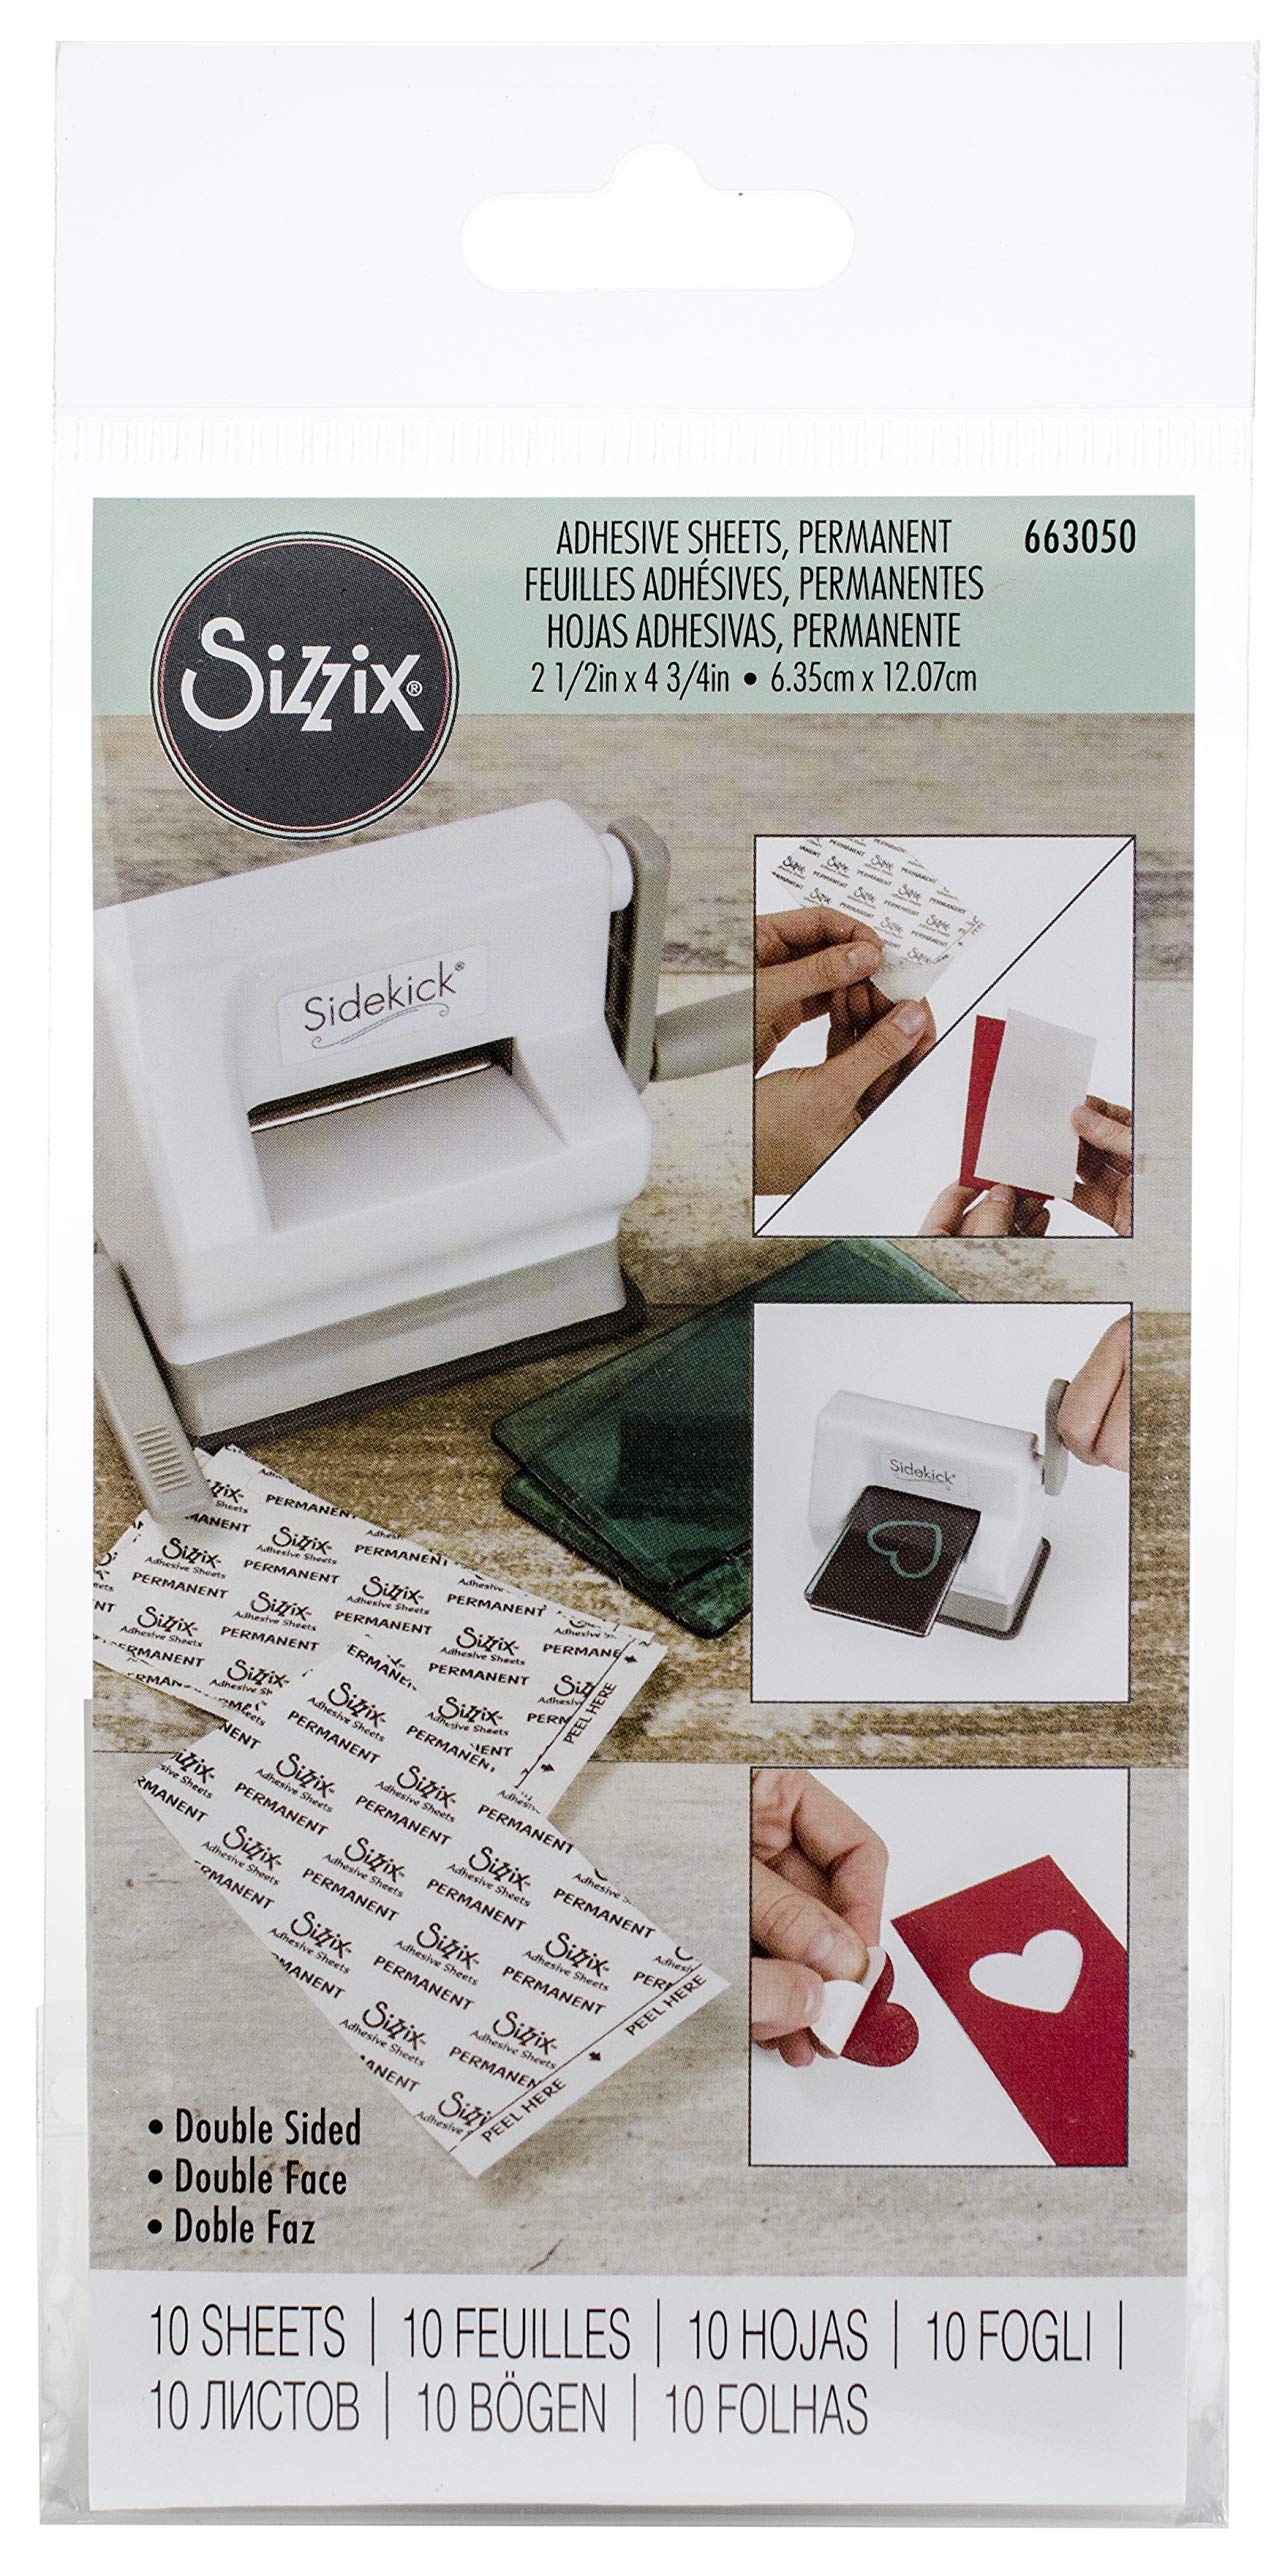 How To Use Sizzix Permanent Adhesive Sheets